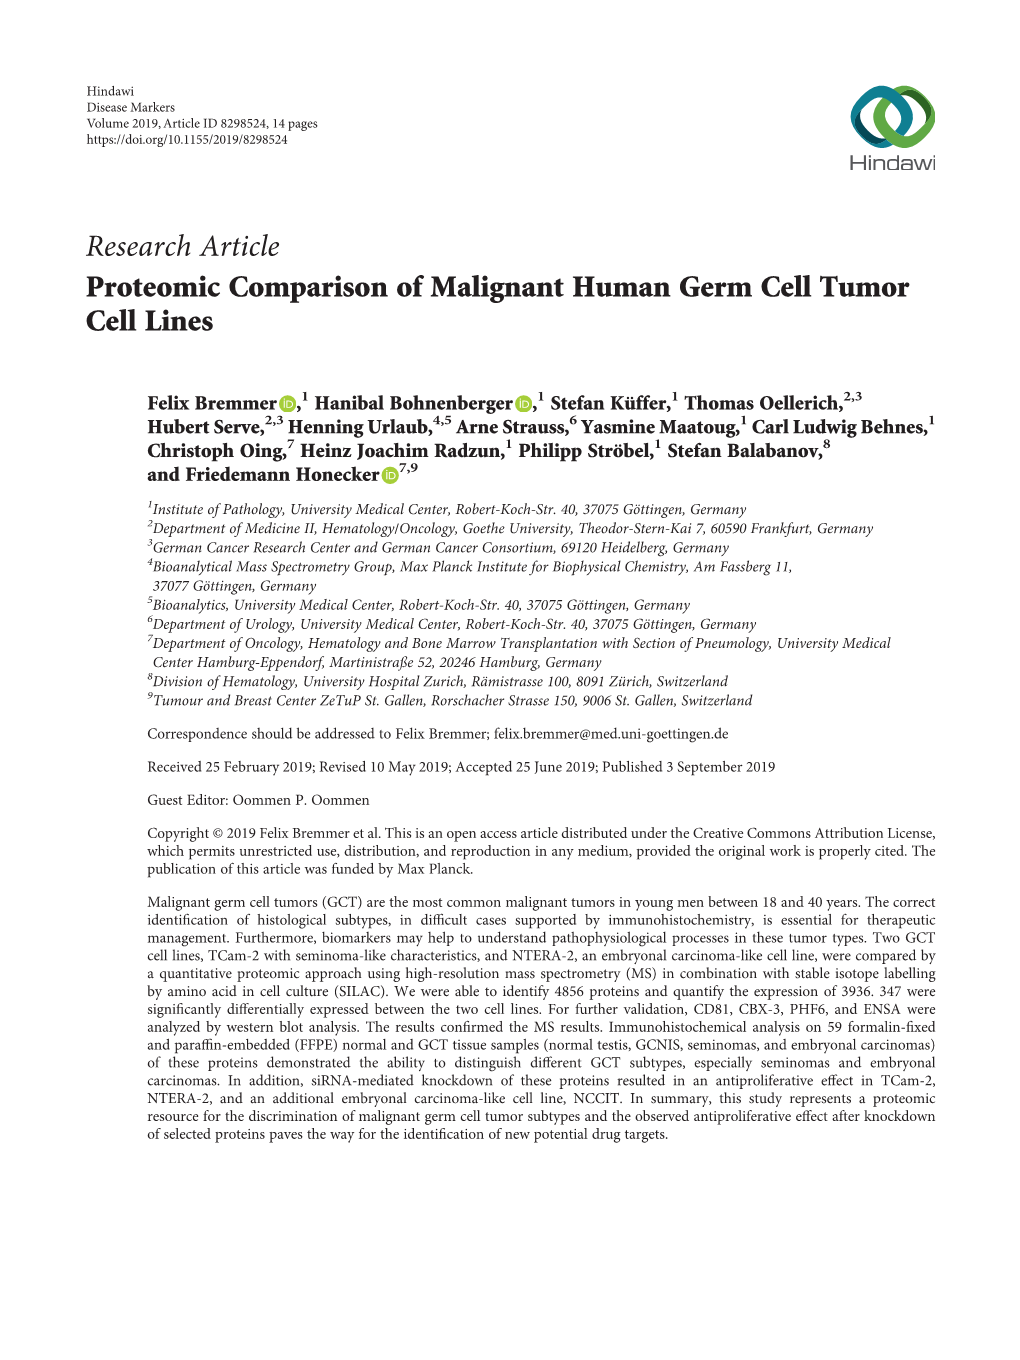 Proteomic Comparison of Malignant Human Germ Cell Tumor Cell Lines